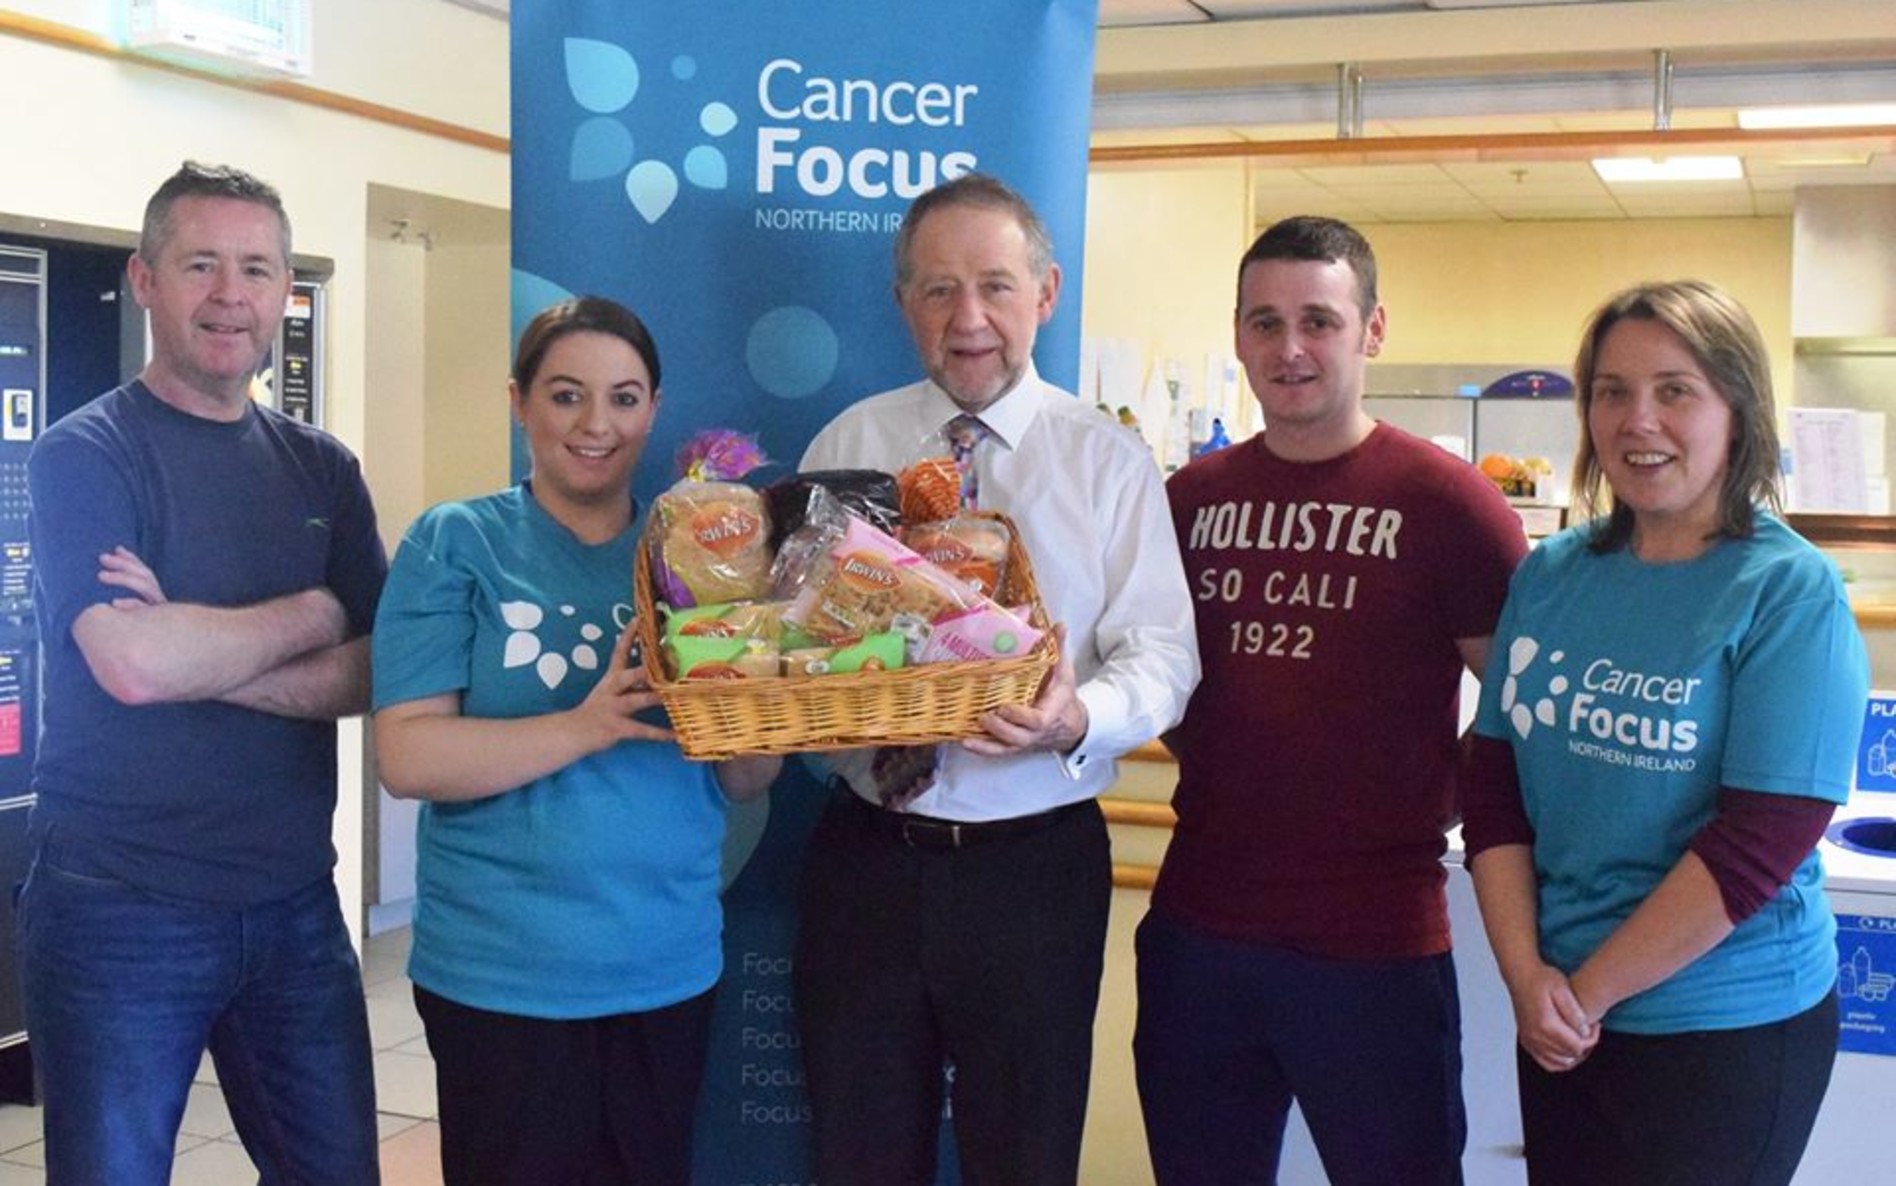 Members of the charity committee, David McKitterick , Amanda McConnell, Brian Irwin, Gareth King and Karen Nixon welcome Cancer Focus as new charity